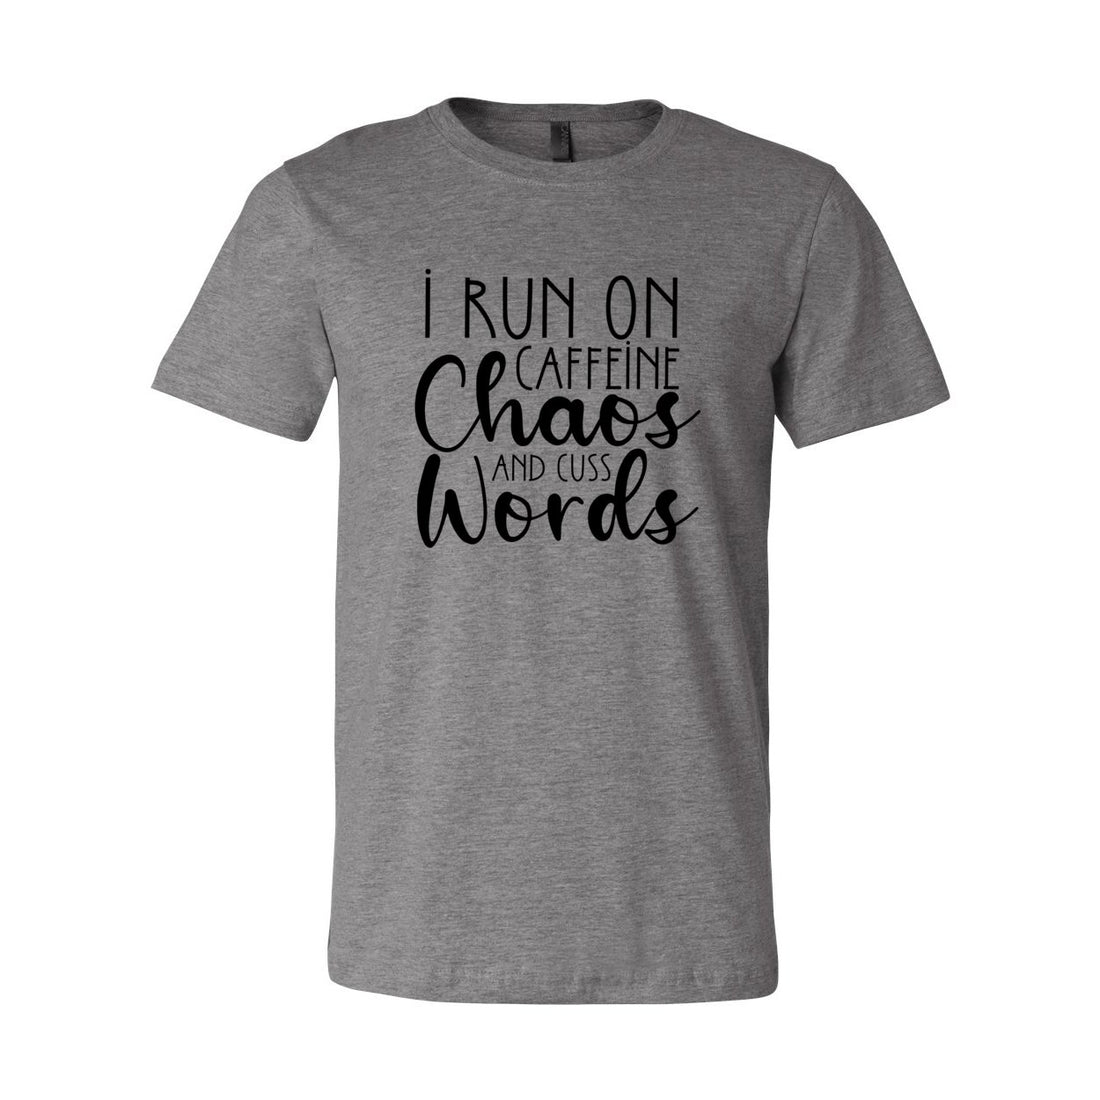 Chaos Jersey Tee - T-Shirts - Positively Sassy - Chaos Jersey Tee